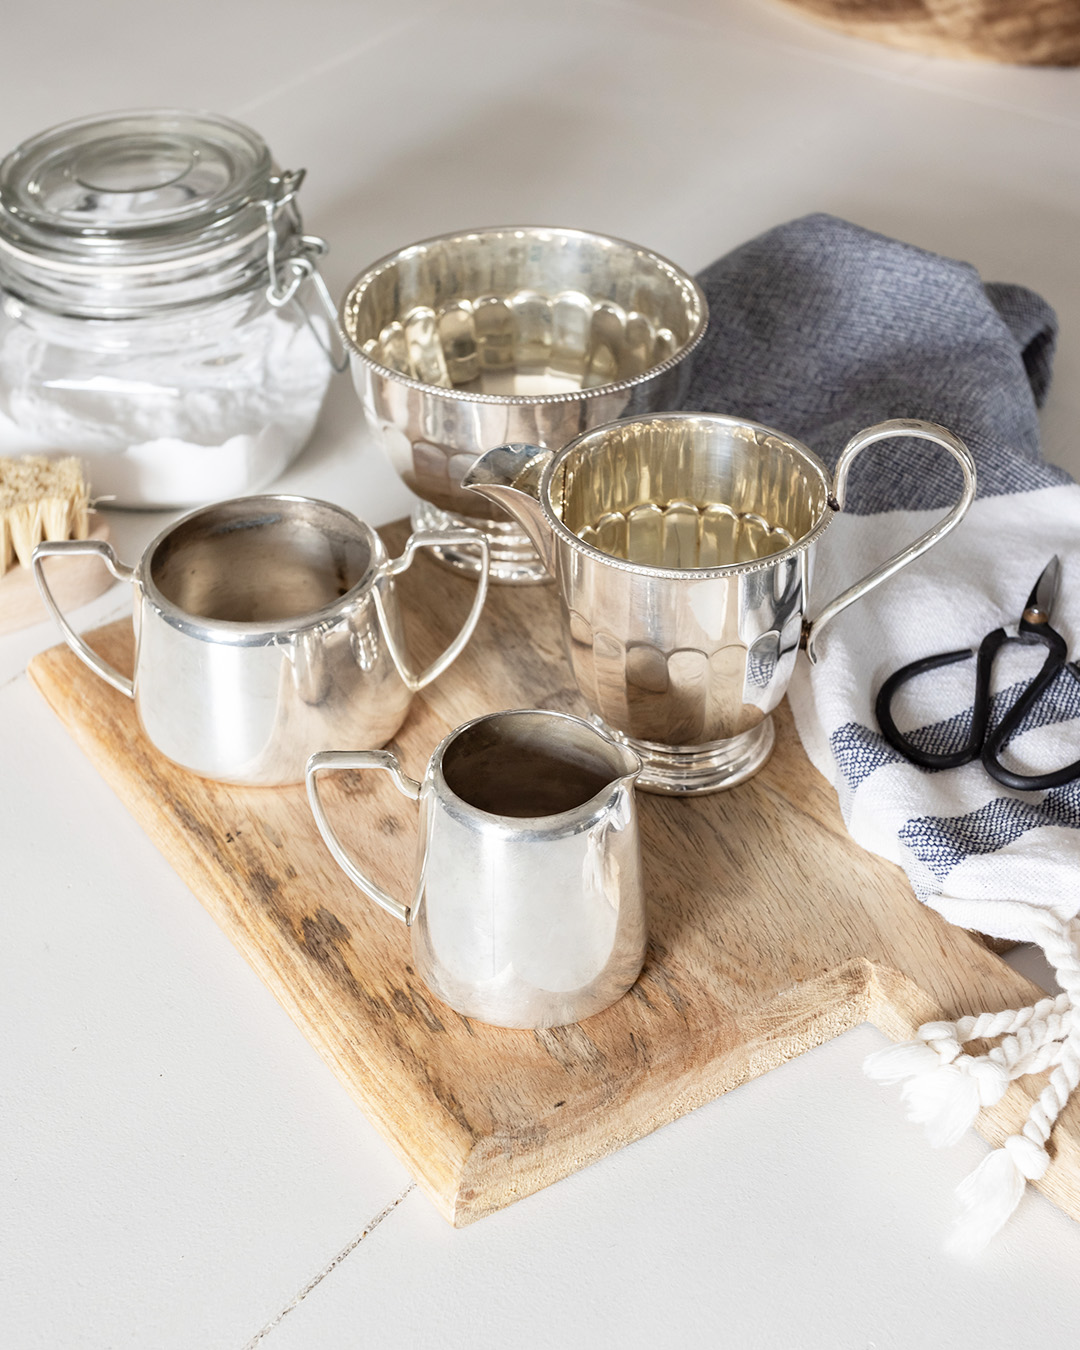 Polishing silver is a great spring cleaning task.